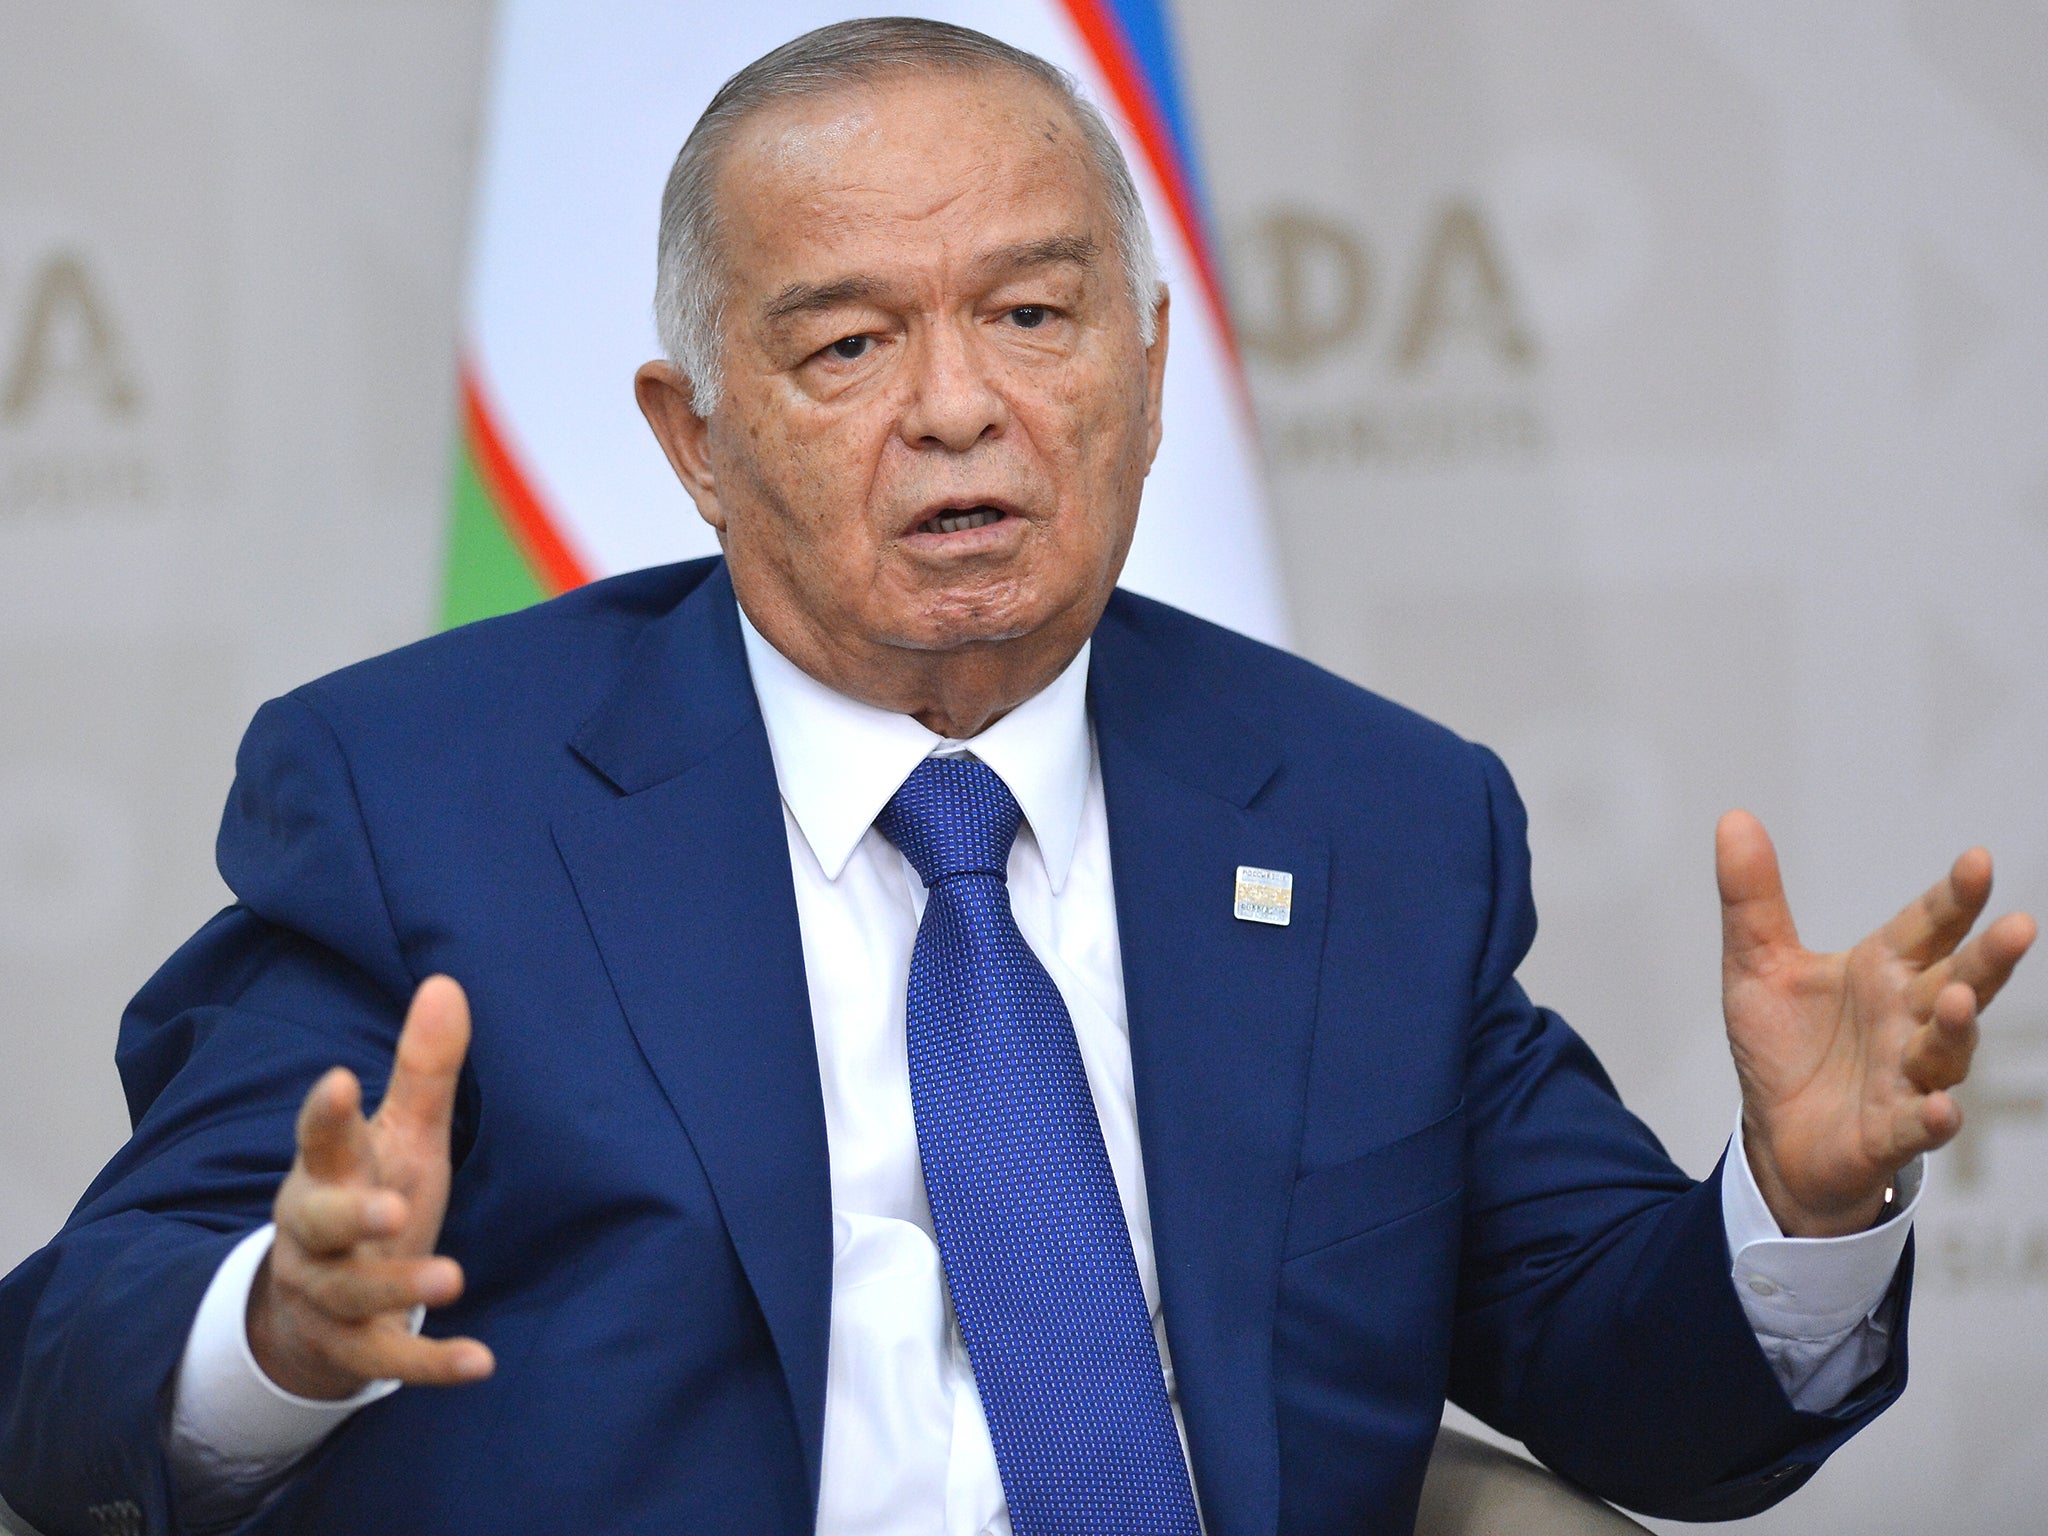 President of Uzbekistan, Islam Karimov, who is rumoured to have died following a stroke